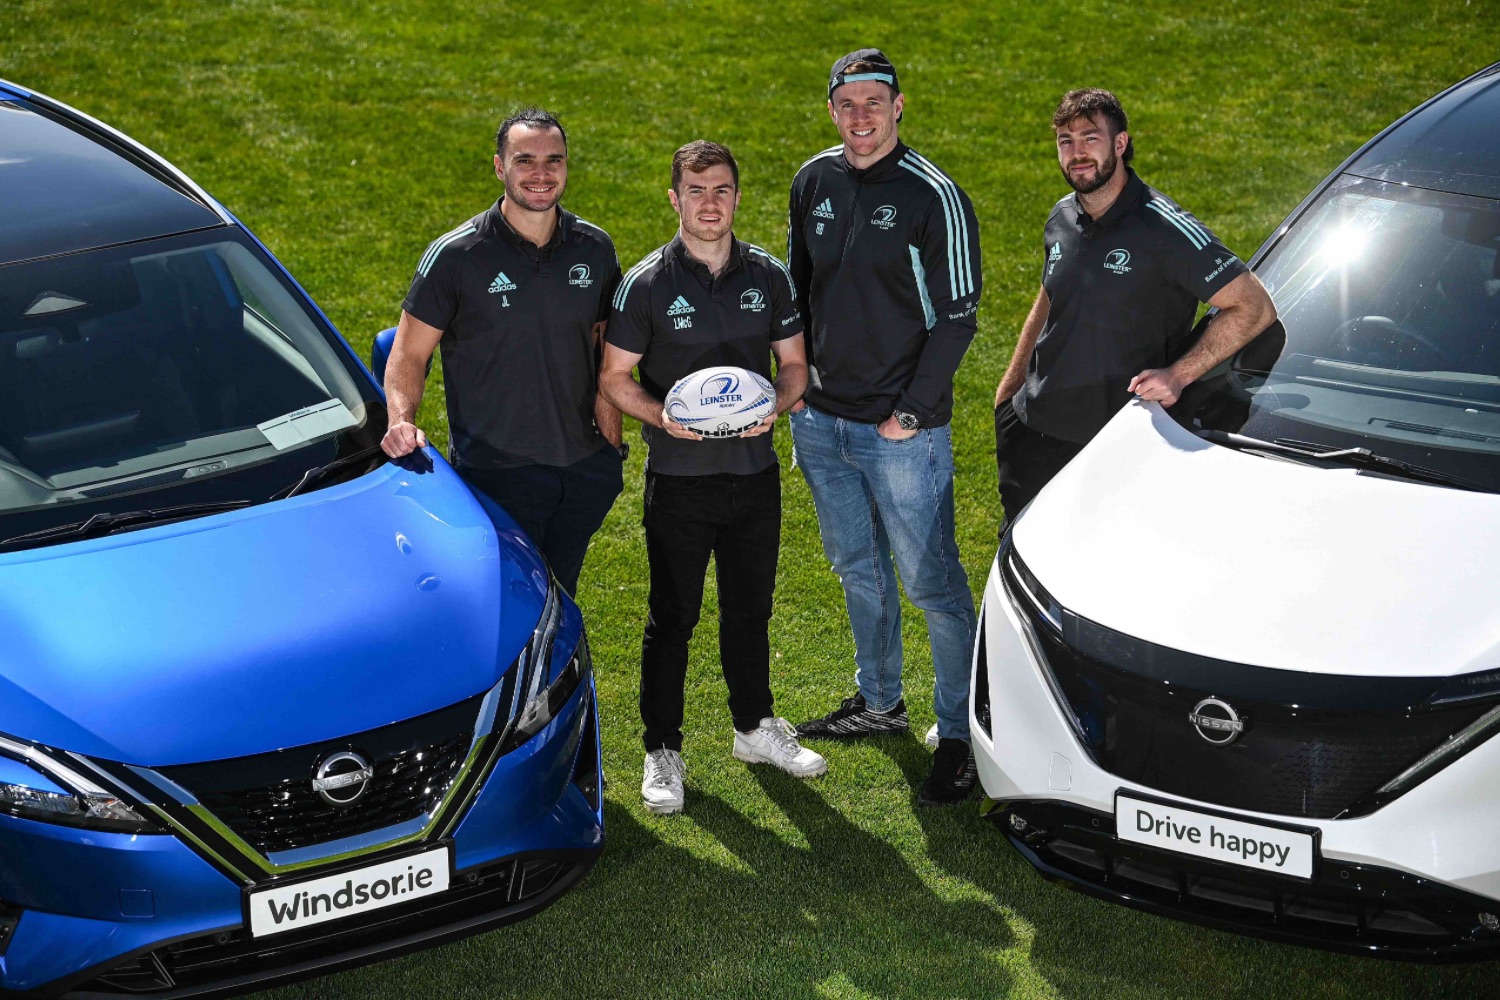 Windsor extends sponsorship with Leinster Rugby